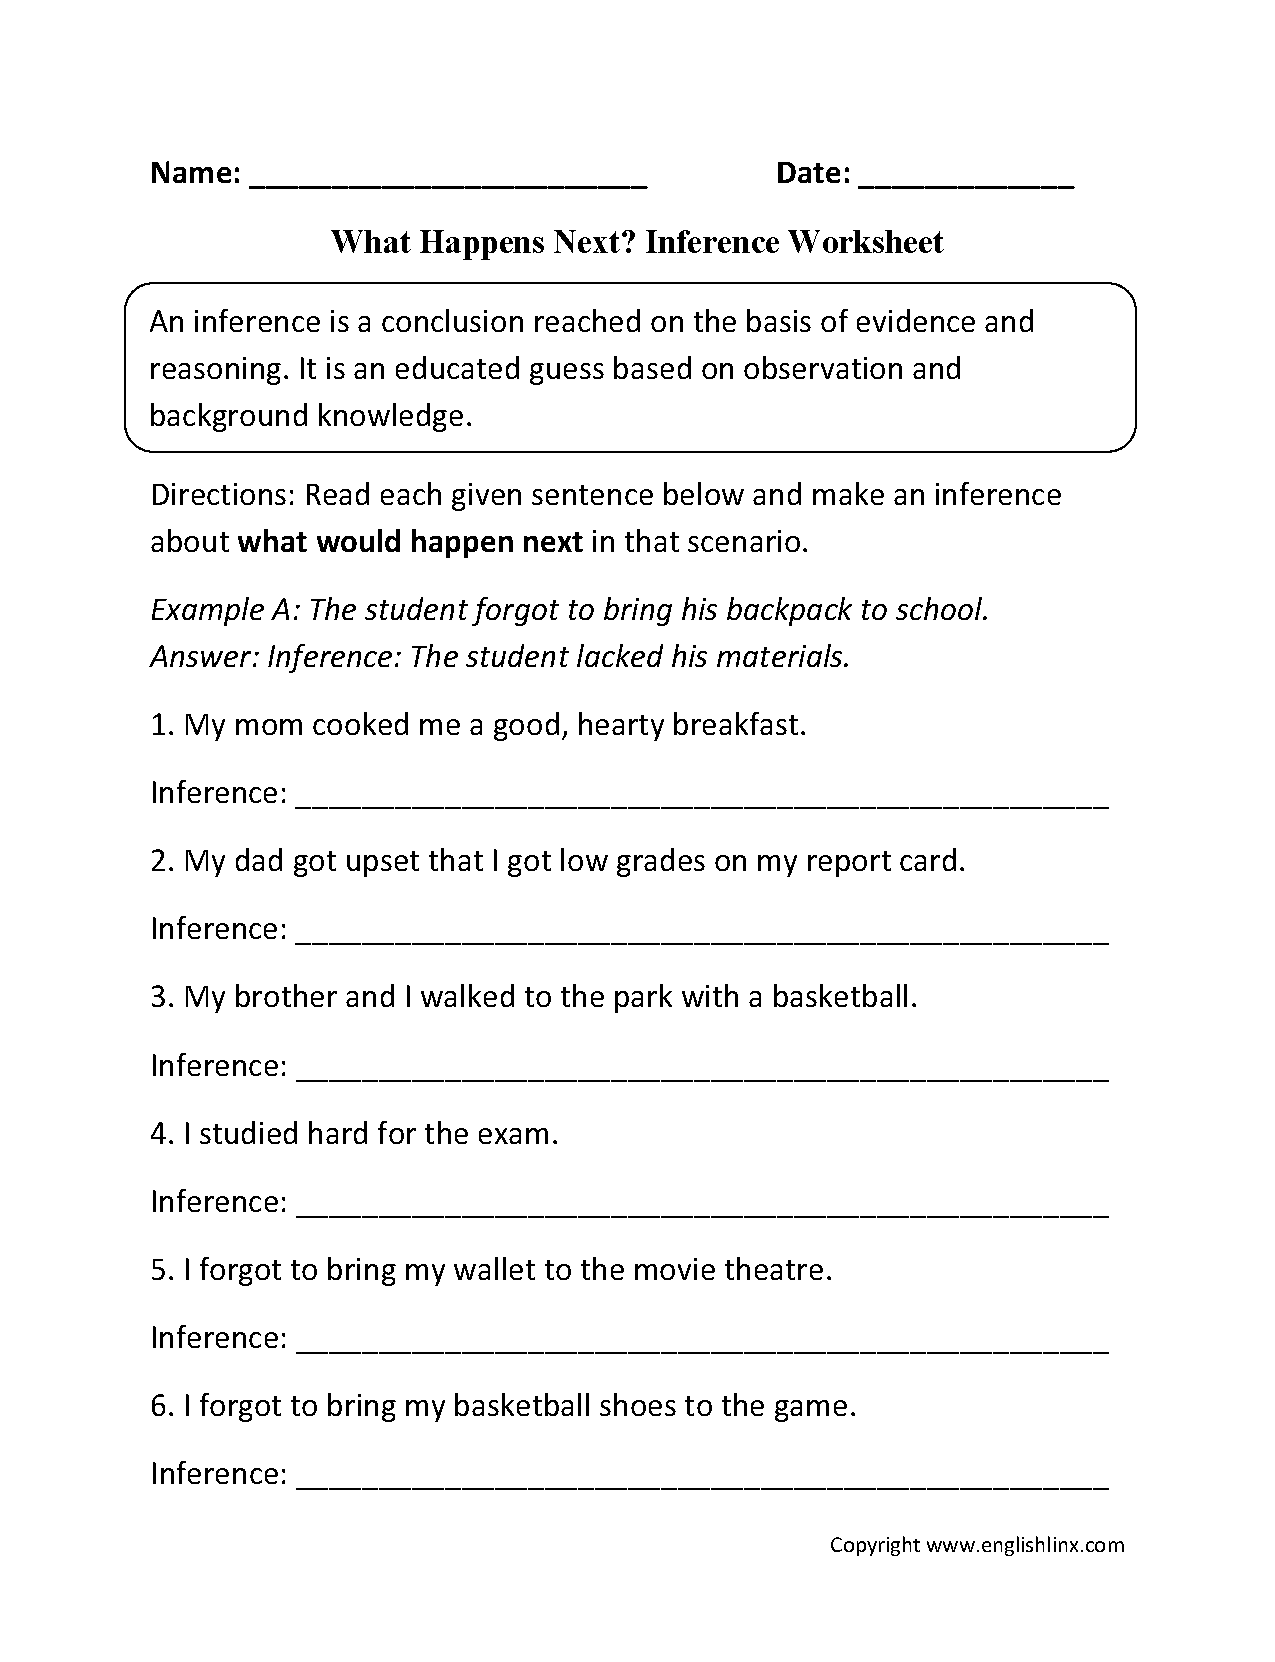 What Happens Next? Inference Worksheets